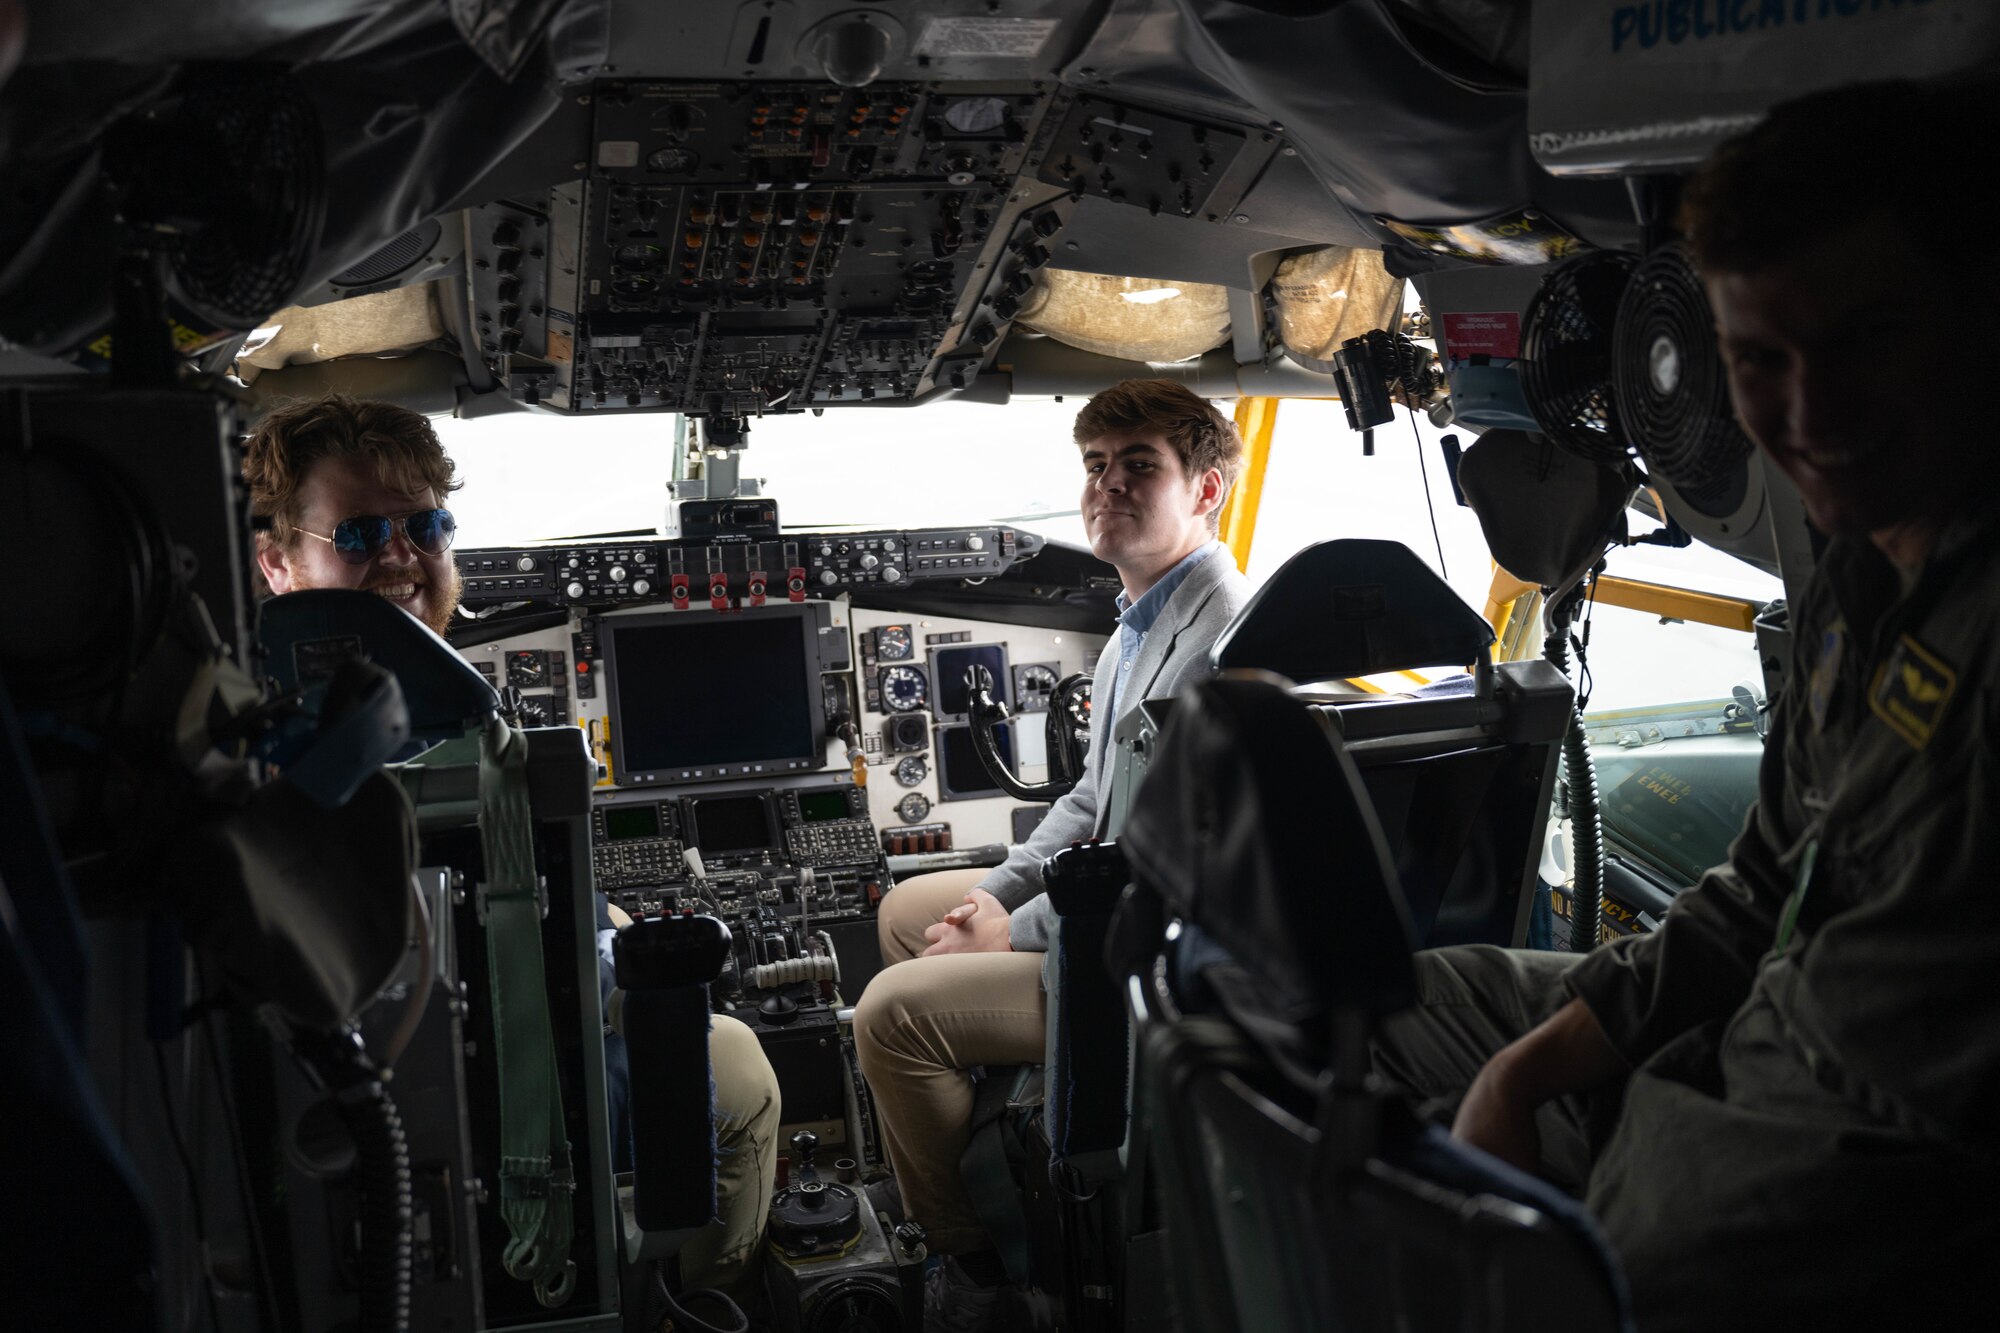 students sit in the cockpit of an aircraft.